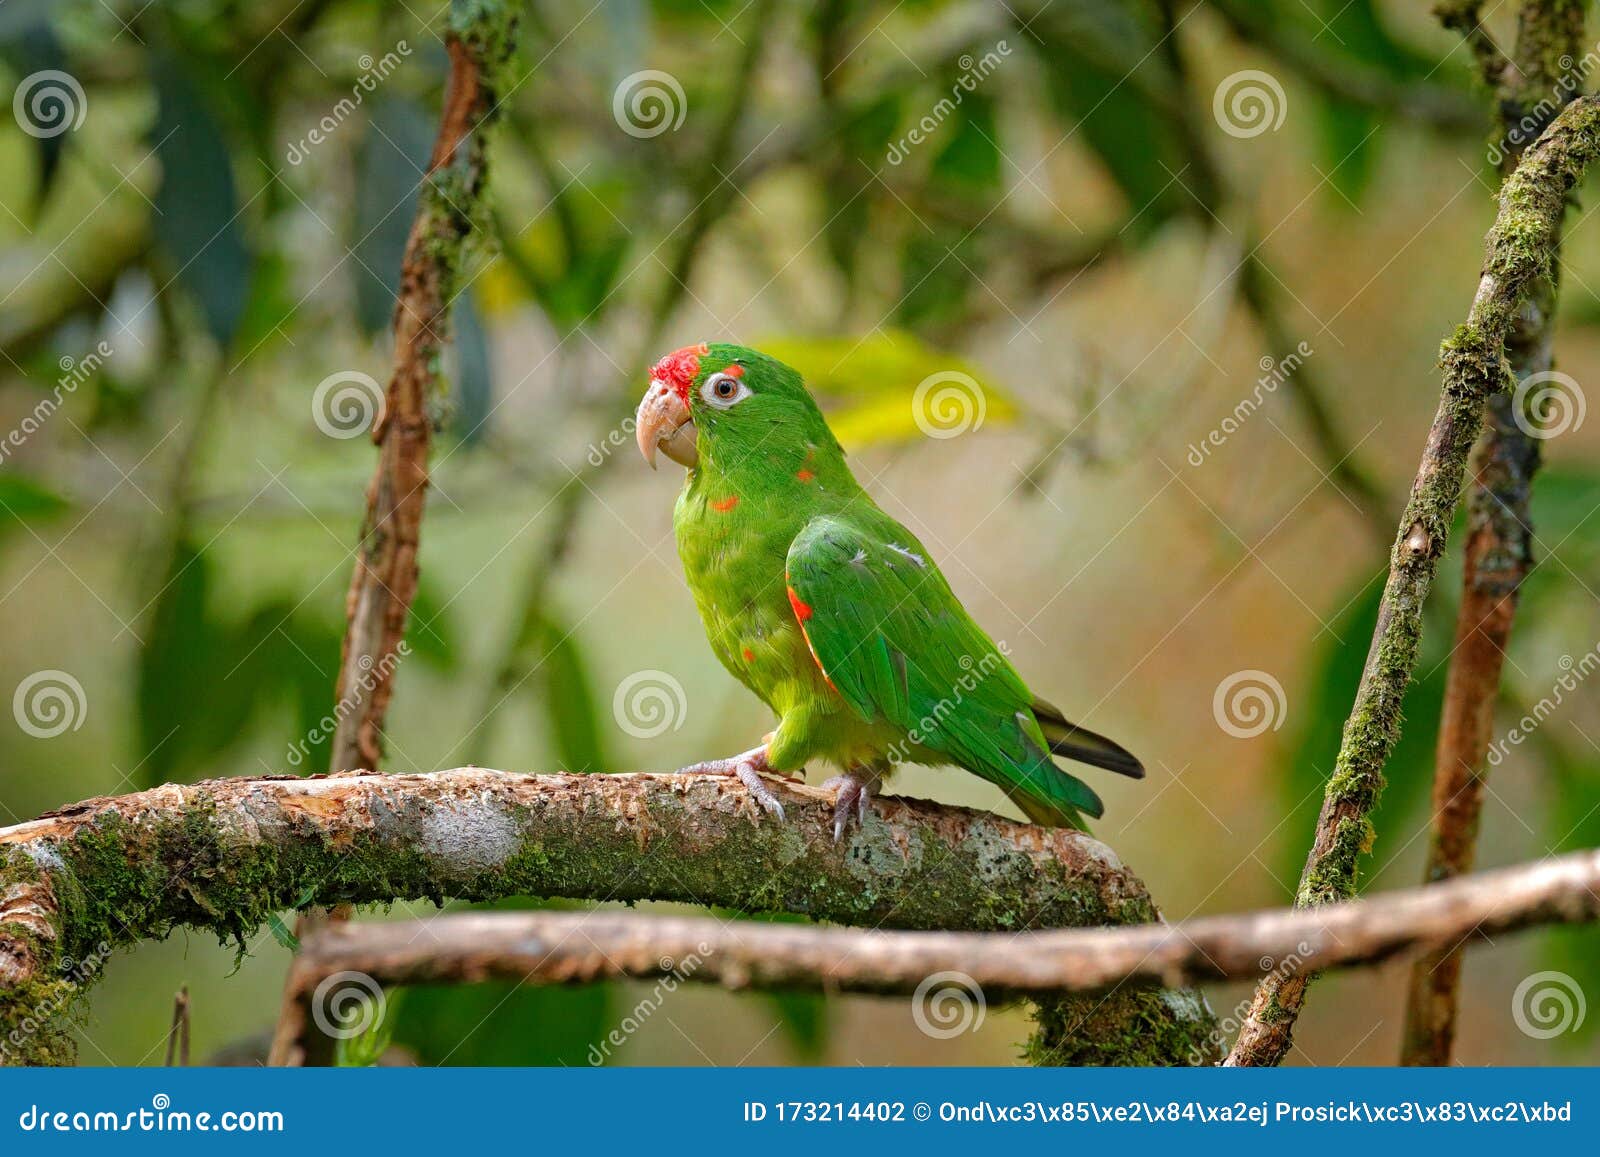 crimson-fronted parakeet (aratinga finschi) portrait of light green parrot with red head, costa rica. wildlife scene from tropical